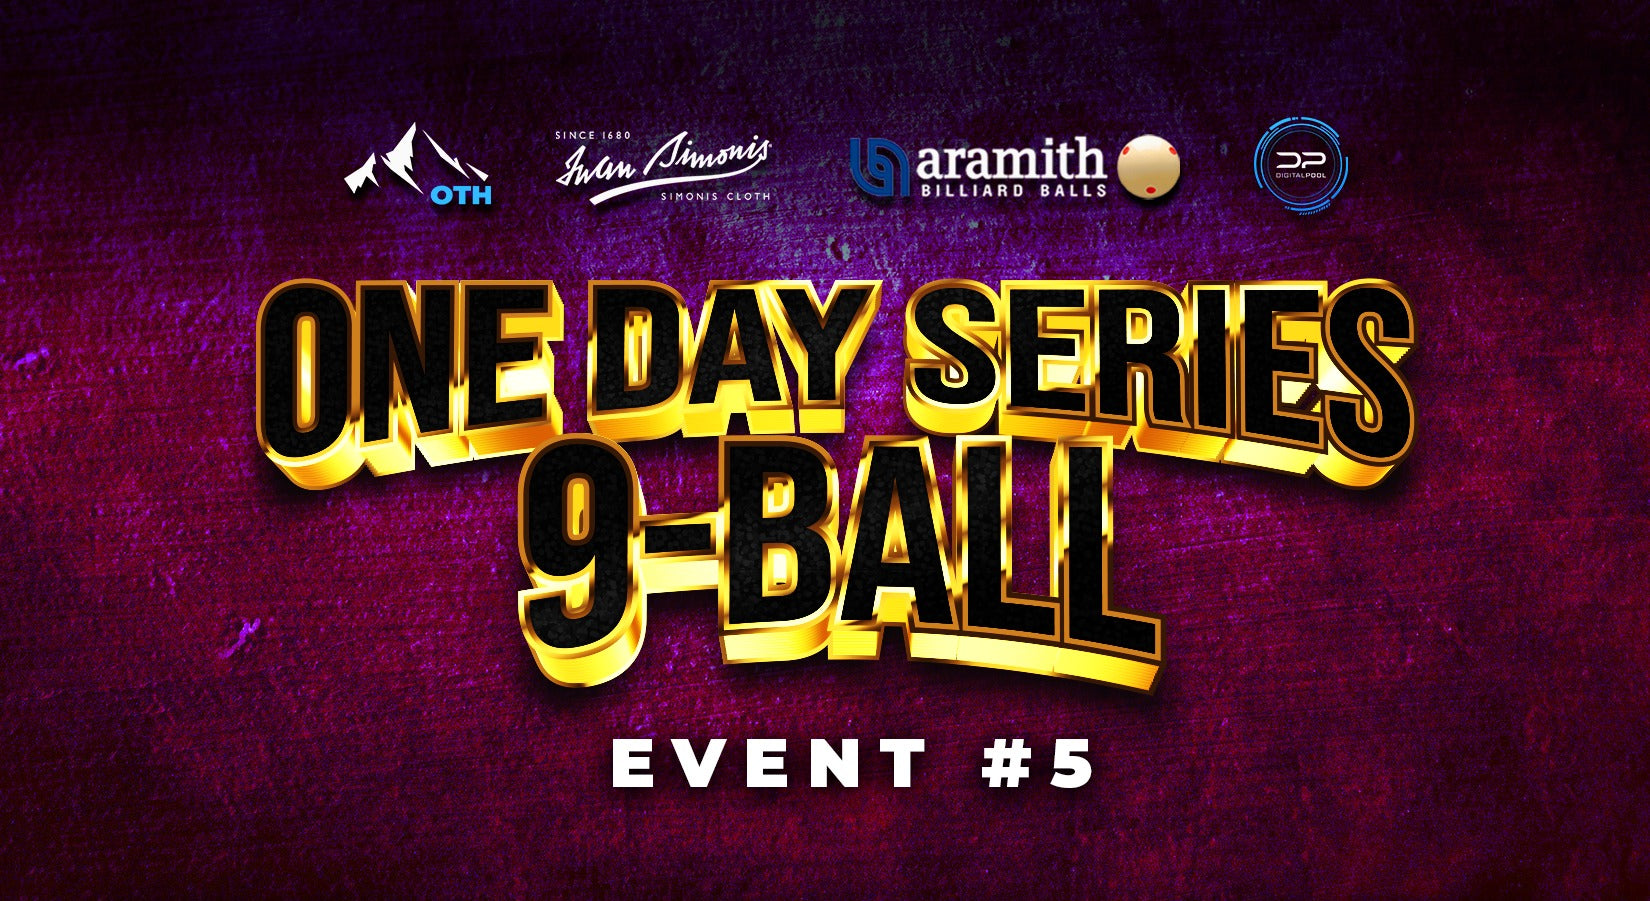 Jul 6 - One Day Open 9-Ball Series Event #5